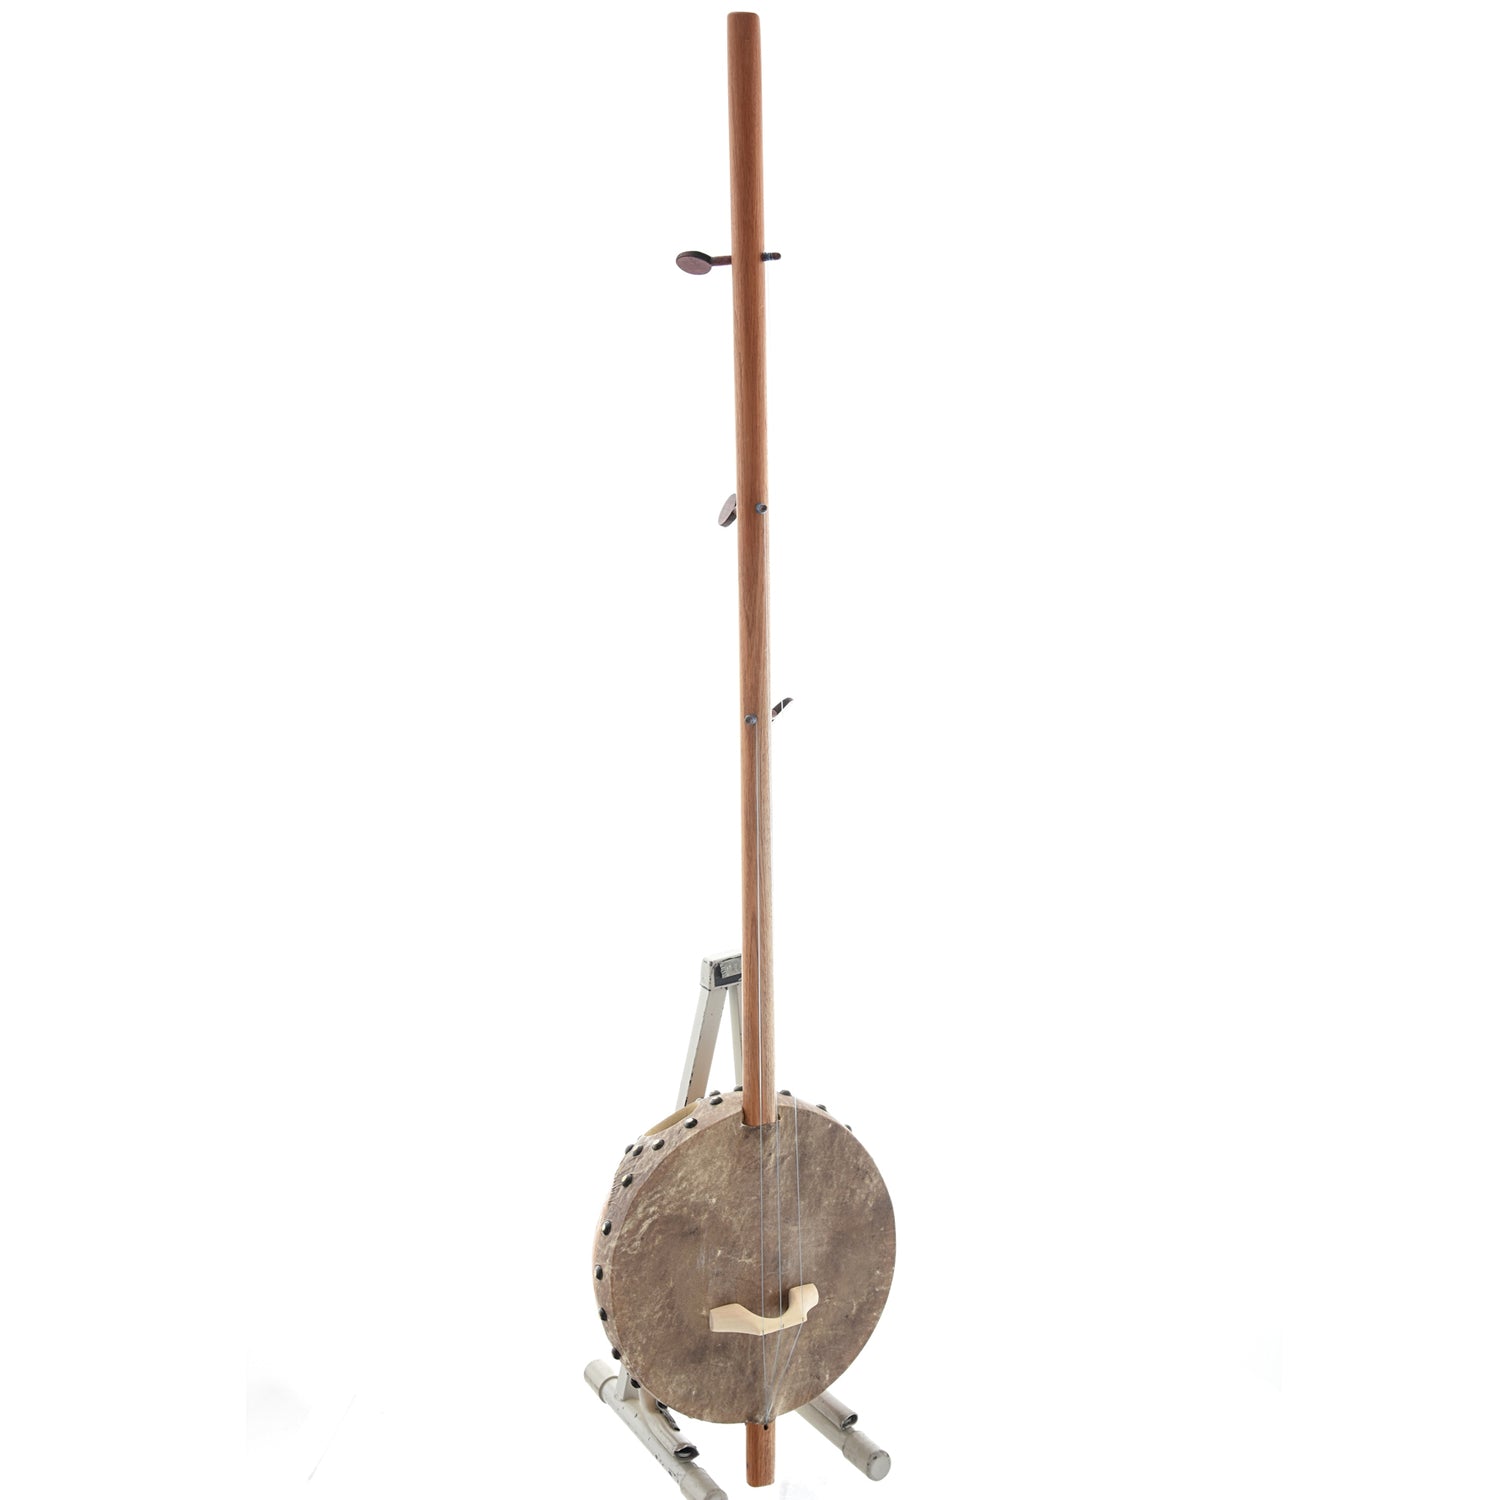 Image 2 of Menzies Gourd Akonting, Jamaican Mahogany - SKU# MAK17-2 : Product Type Other Banjos : Elderly Instruments